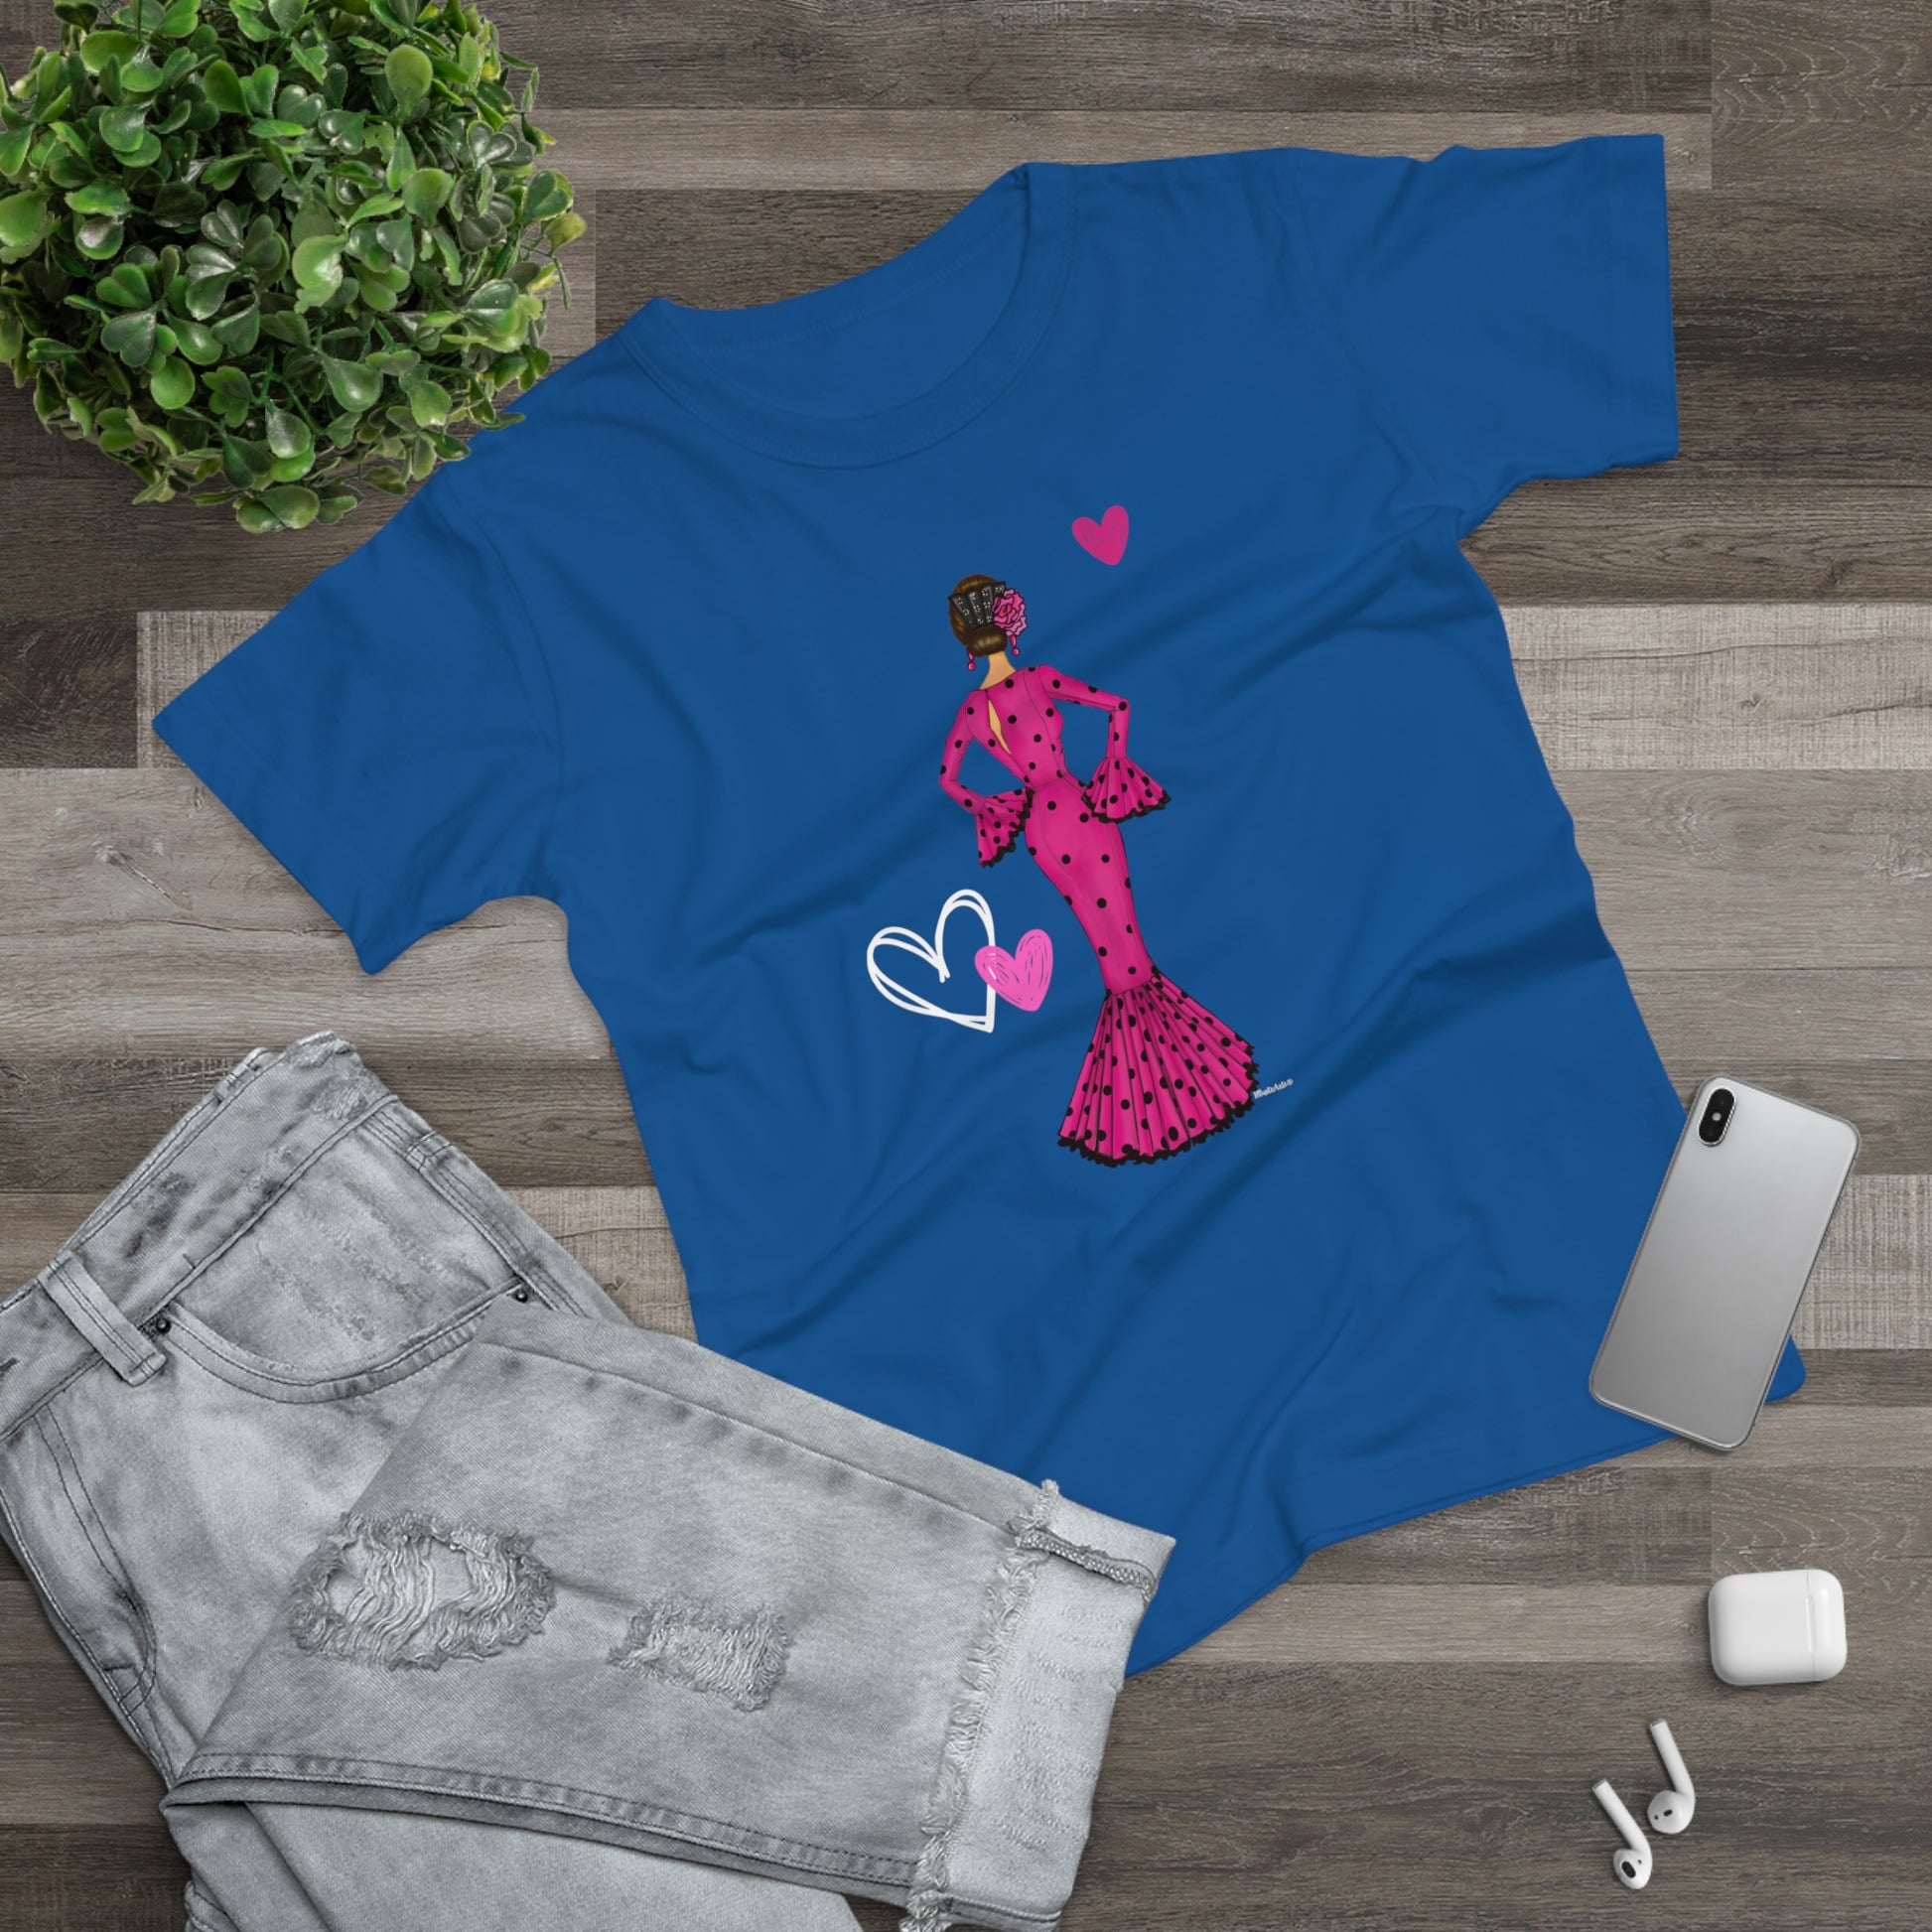 a t - shirt with a picture of a woman in a pink dress